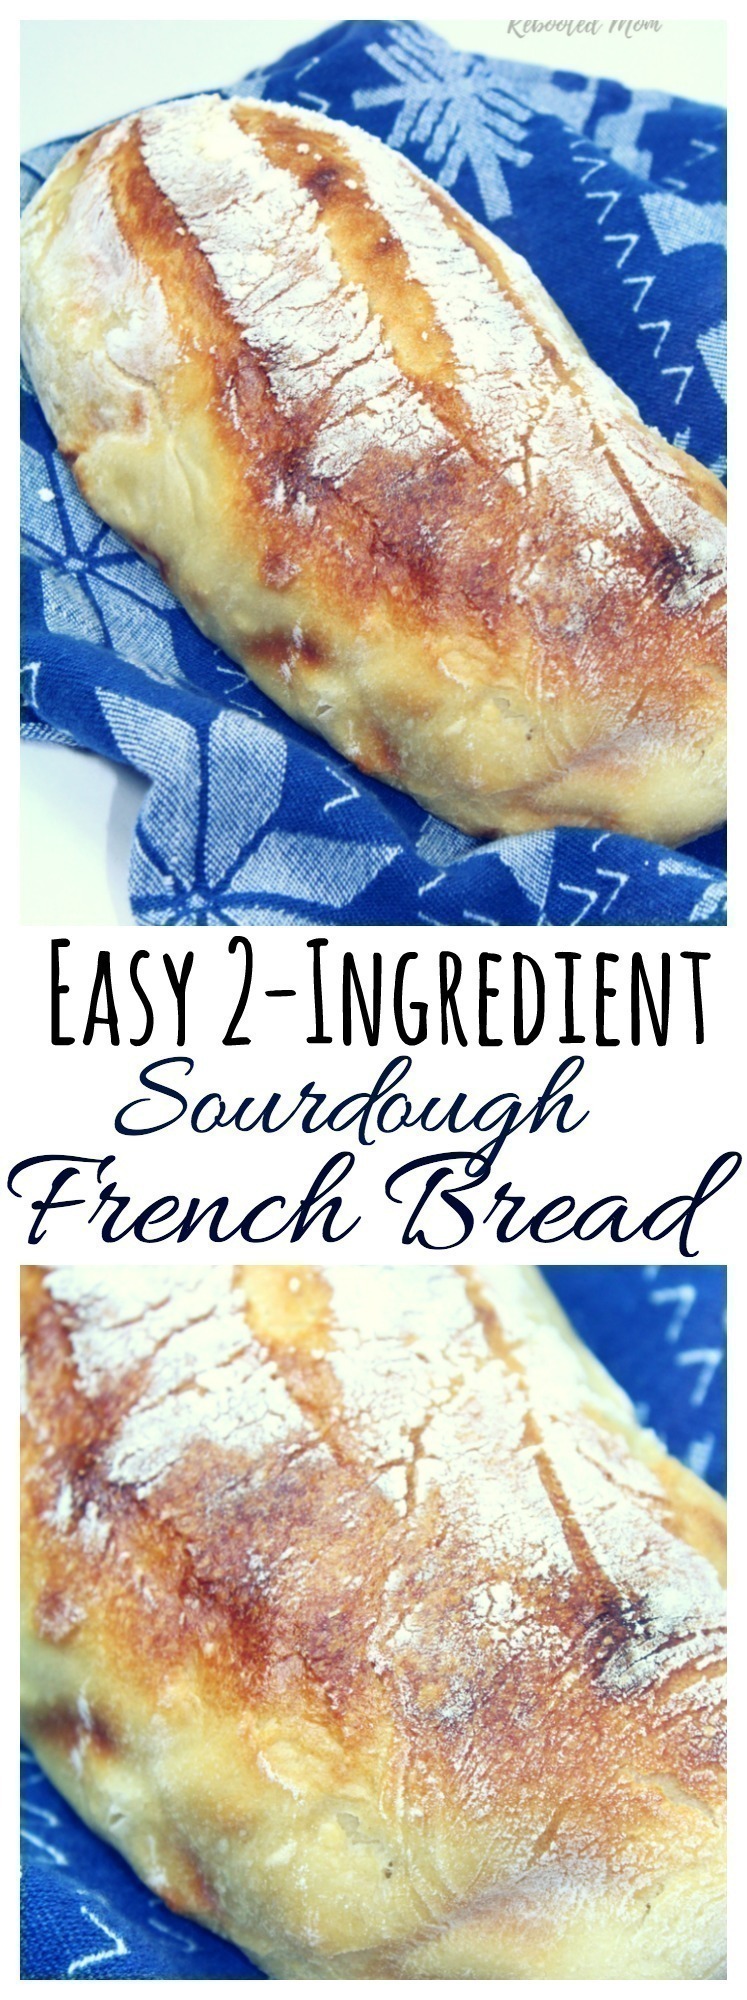 A beautiful loaf of gluten-free sourdough french bread bakes up with just 2 simple ingredients!